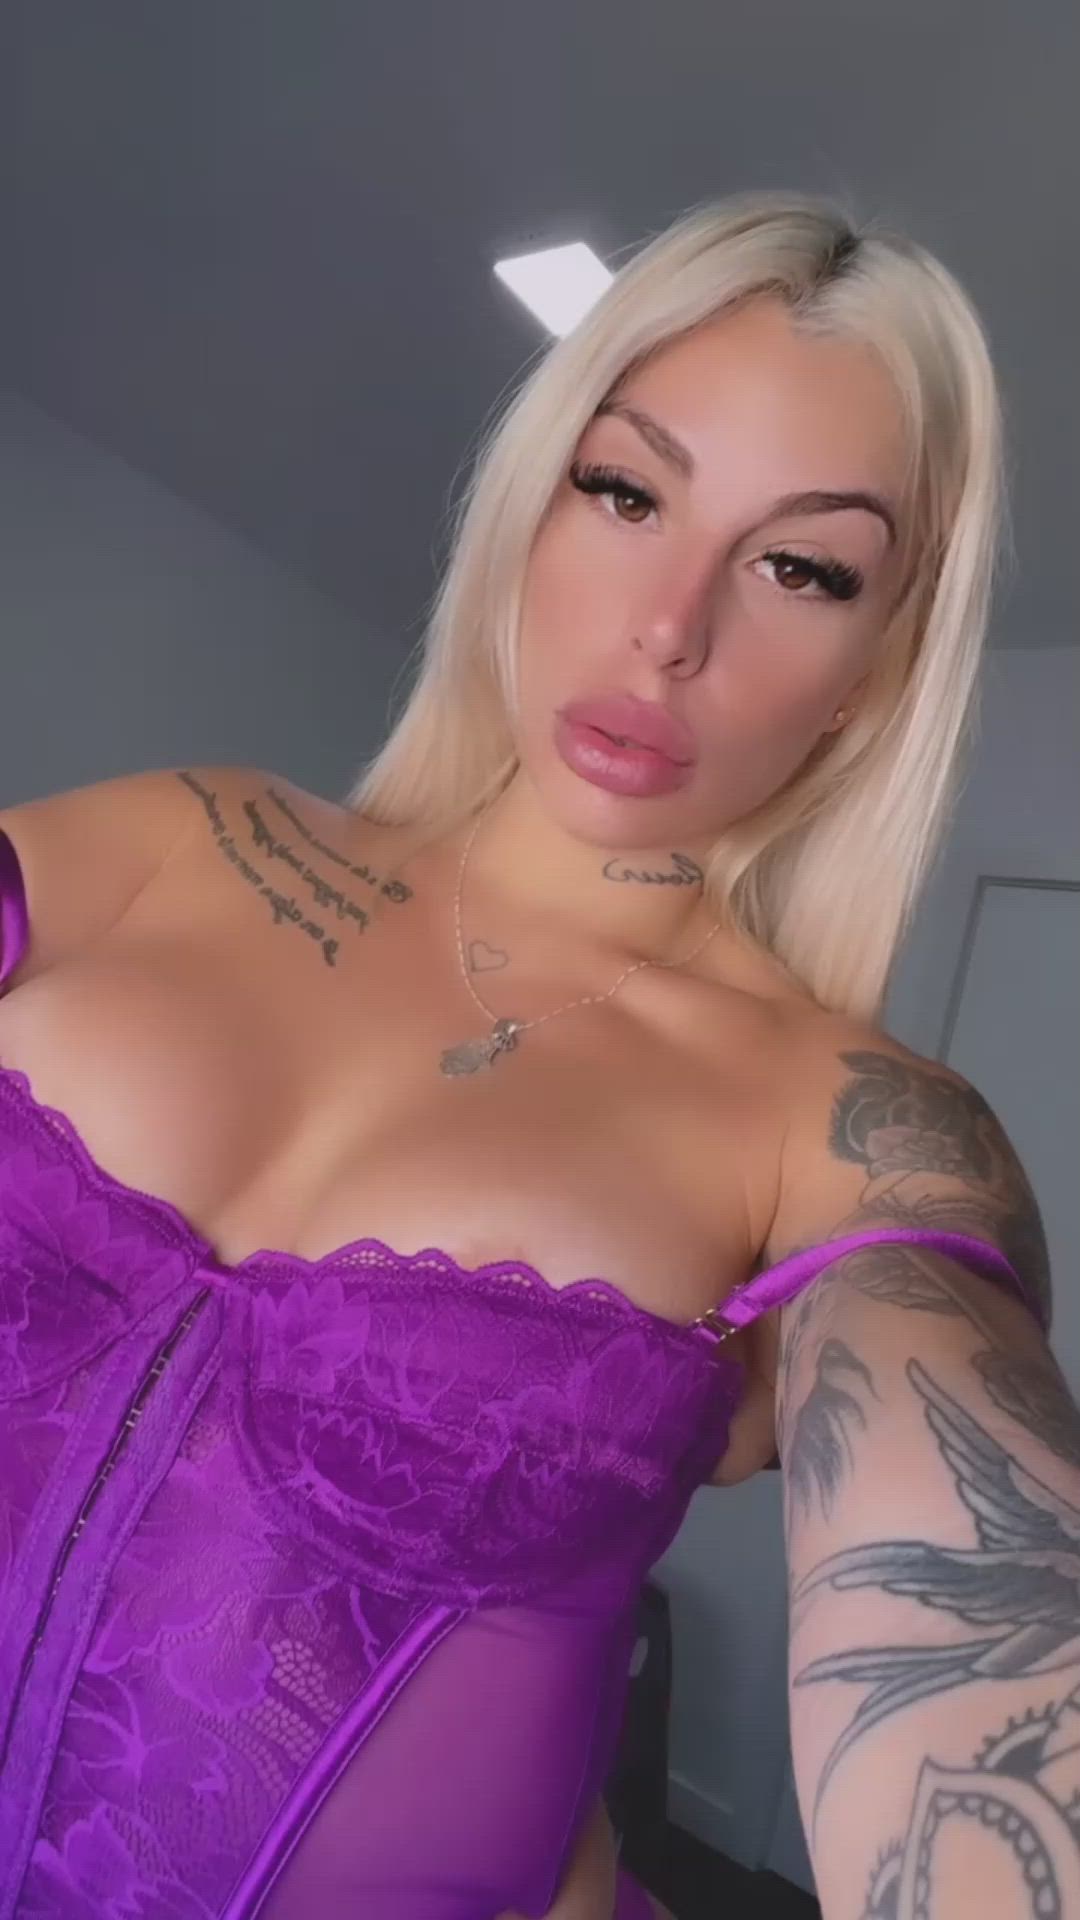 Ass porn video with onlyfans model adrianasky3 <strong>@adriana_skye</strong>